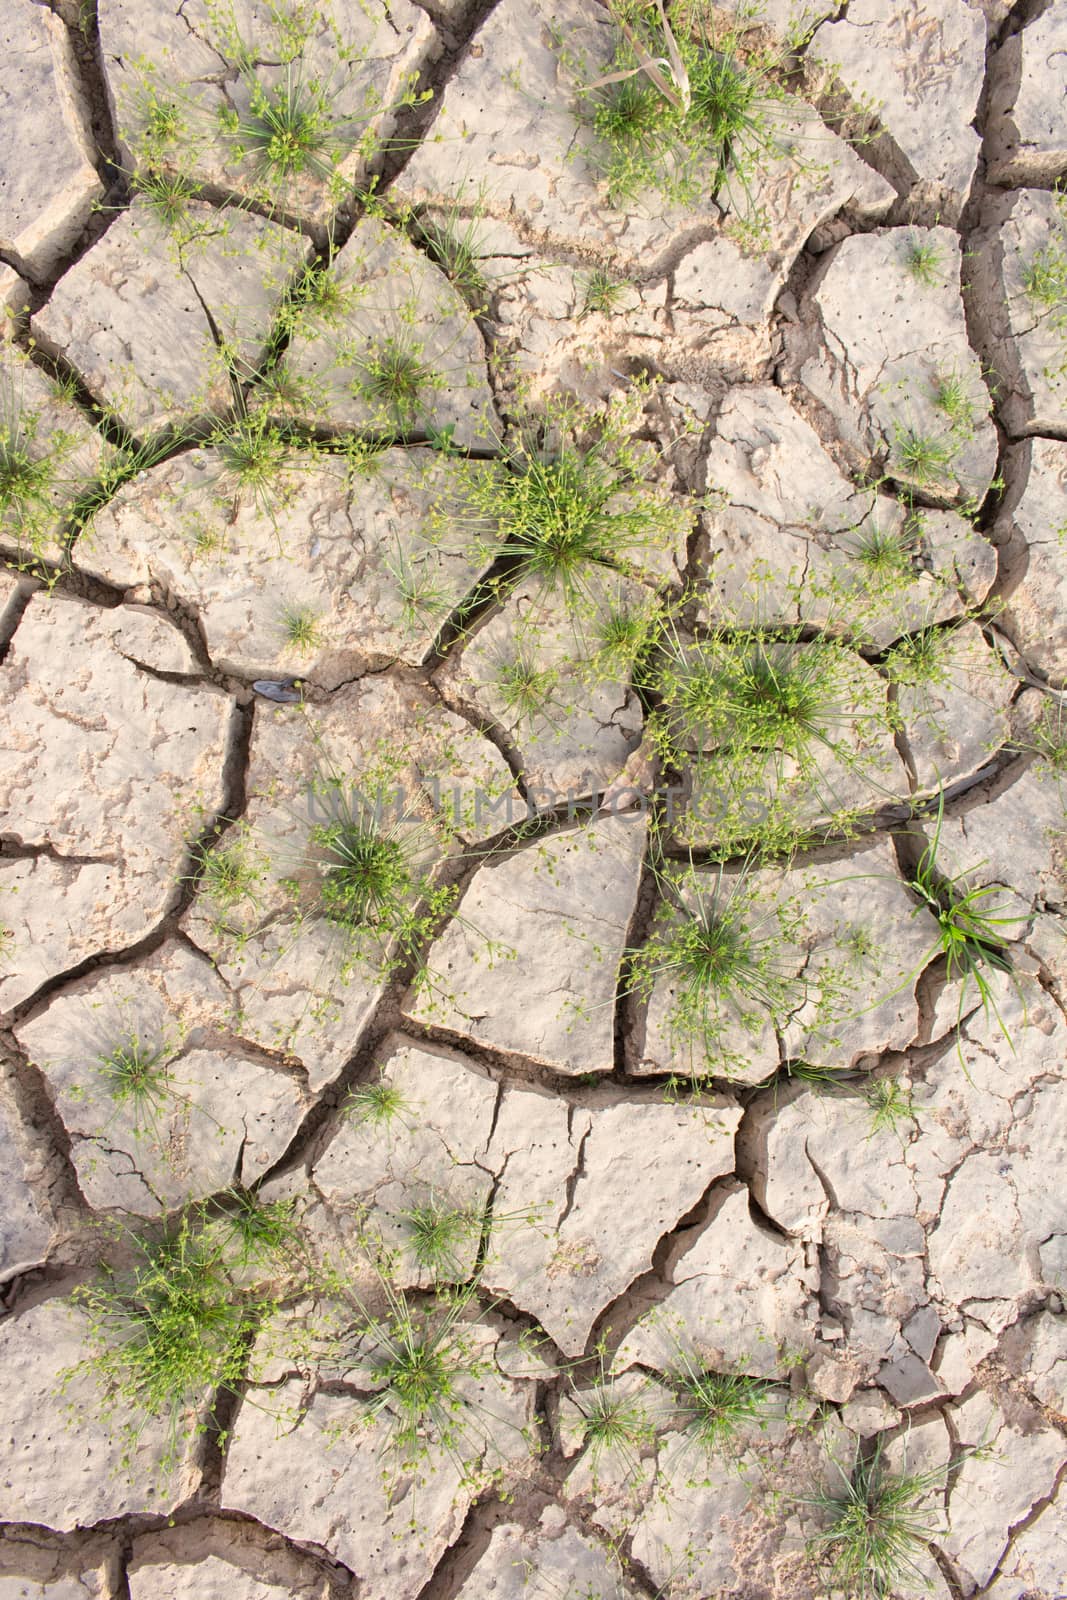 Cracked ground and survival living thing, cruel from global warm